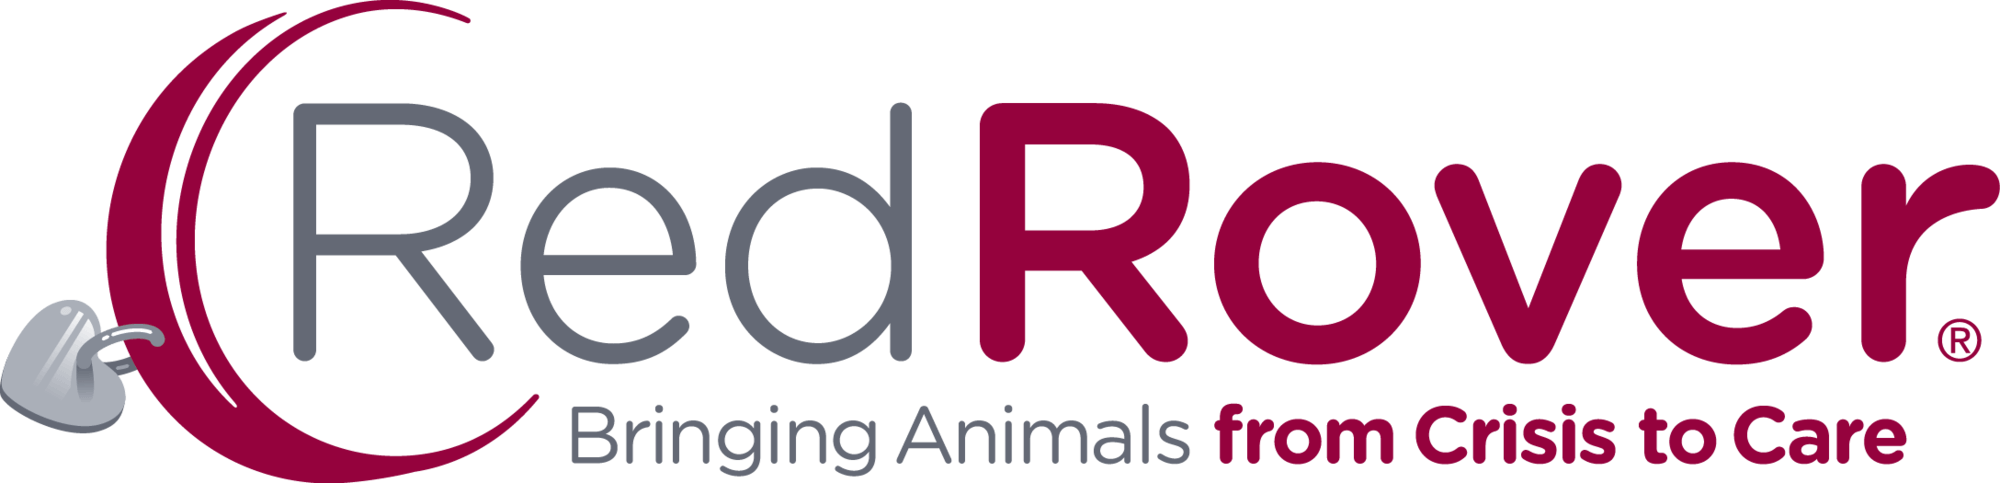 RedRover Caring for Animals in Oklahoma Flooding Aftermath